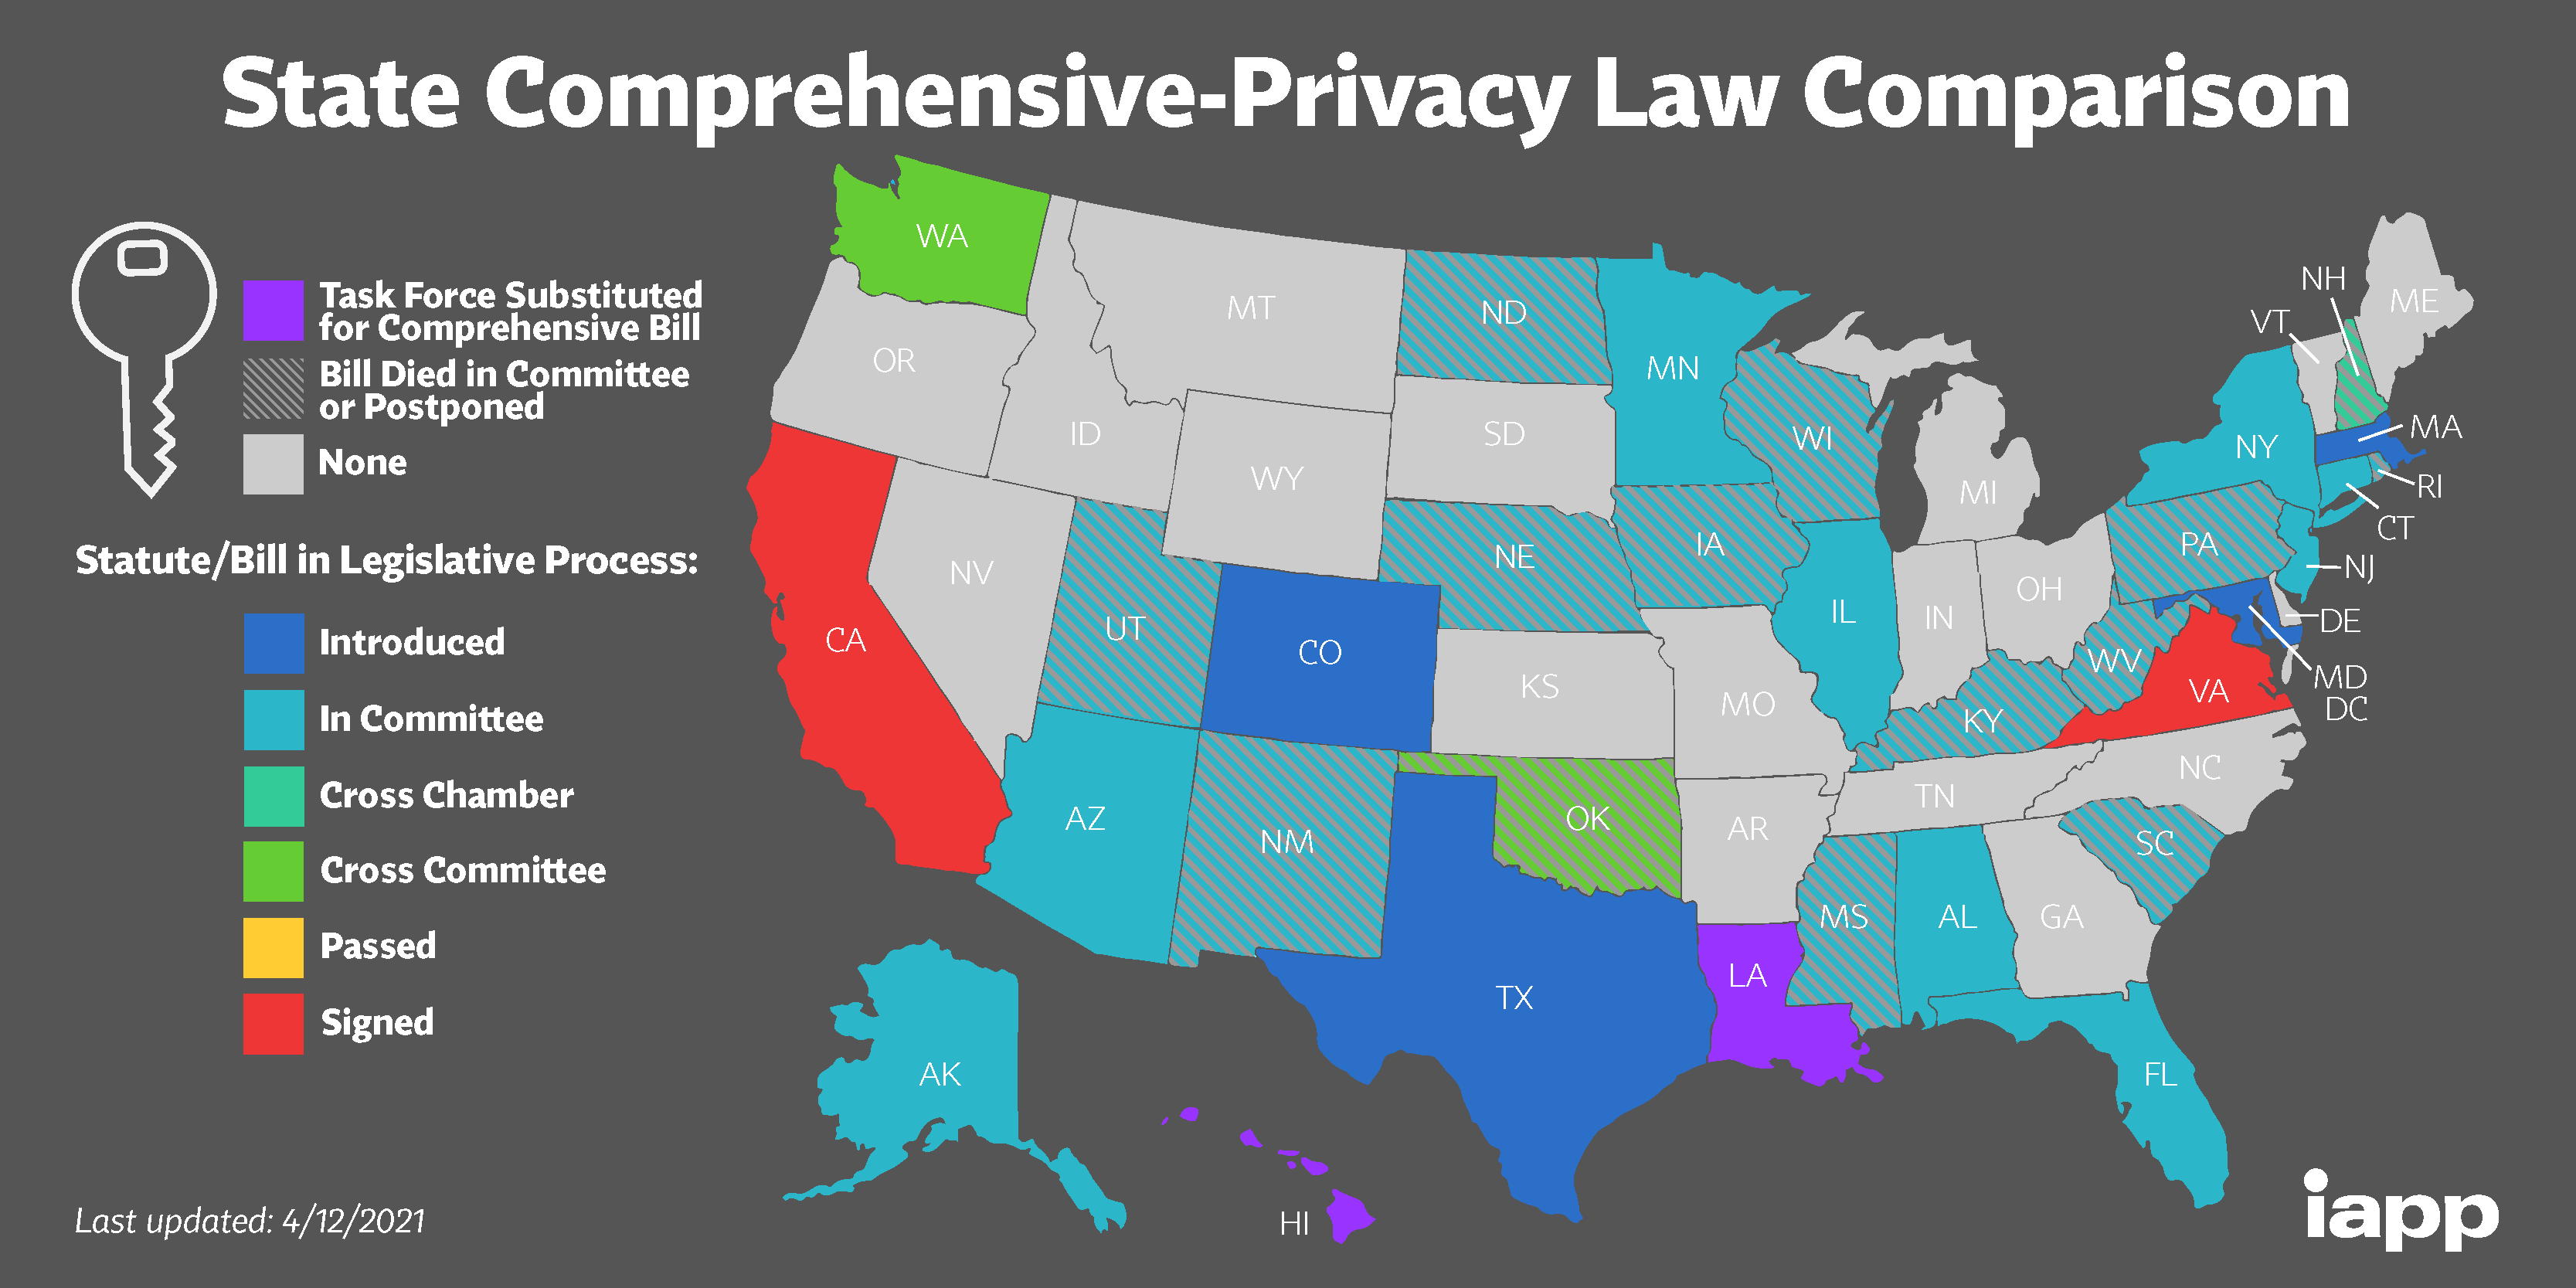 A map of the United States color coded to show which states are working on comprehensive data privacy laws